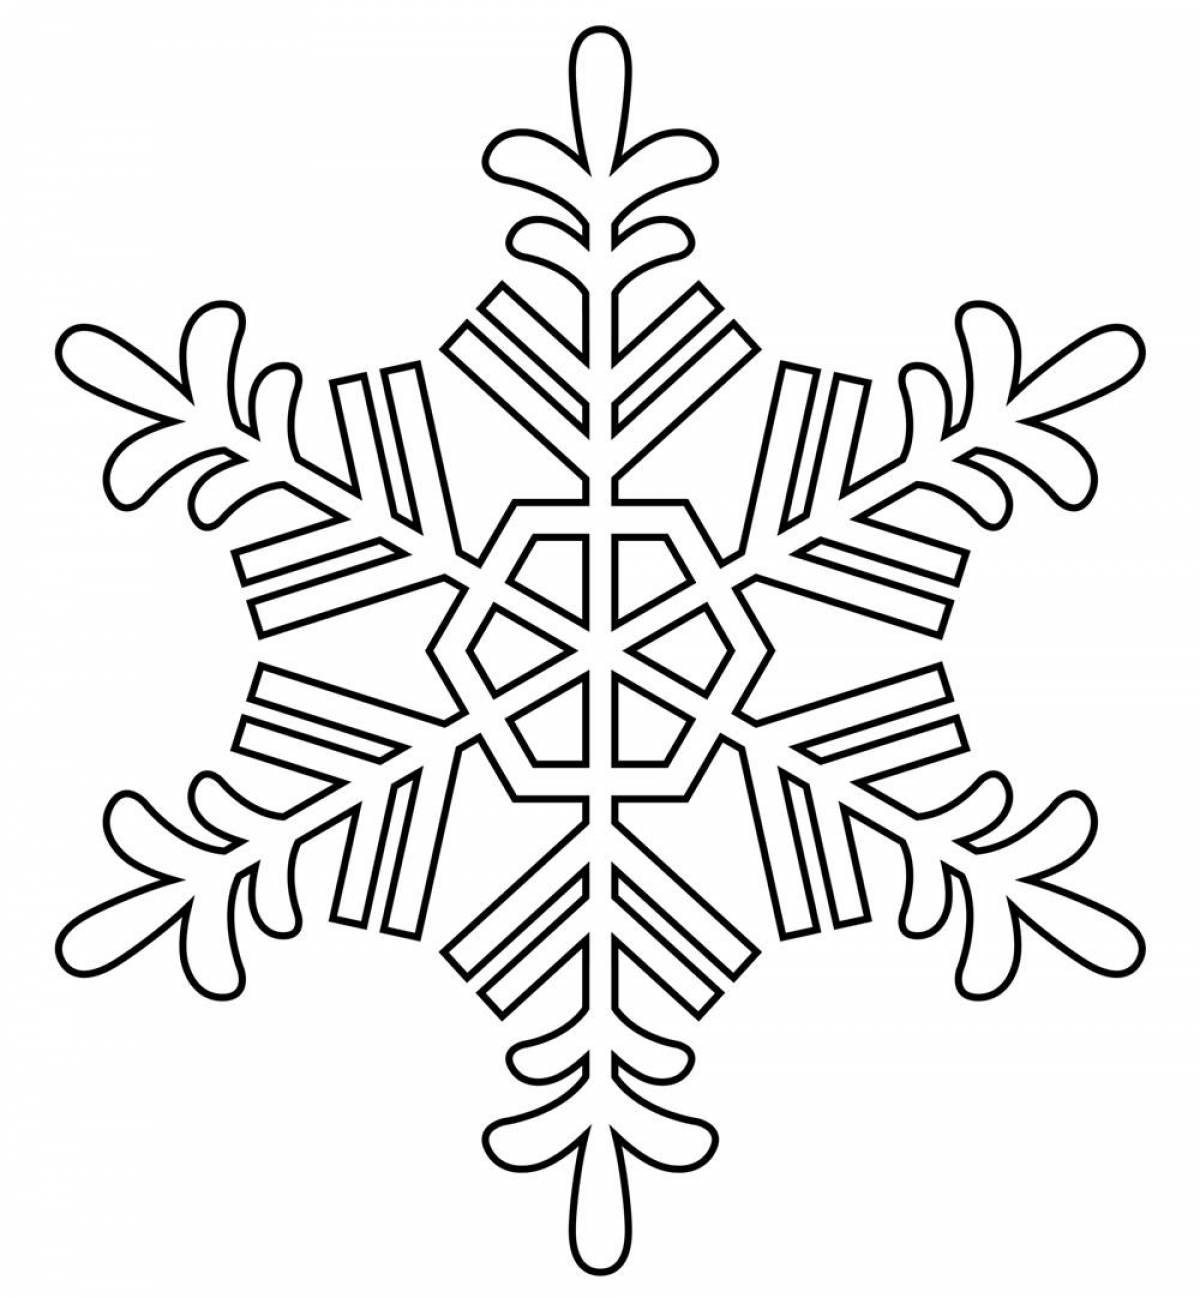 Fascinating snowflake coloring book for kids 5-6 years old